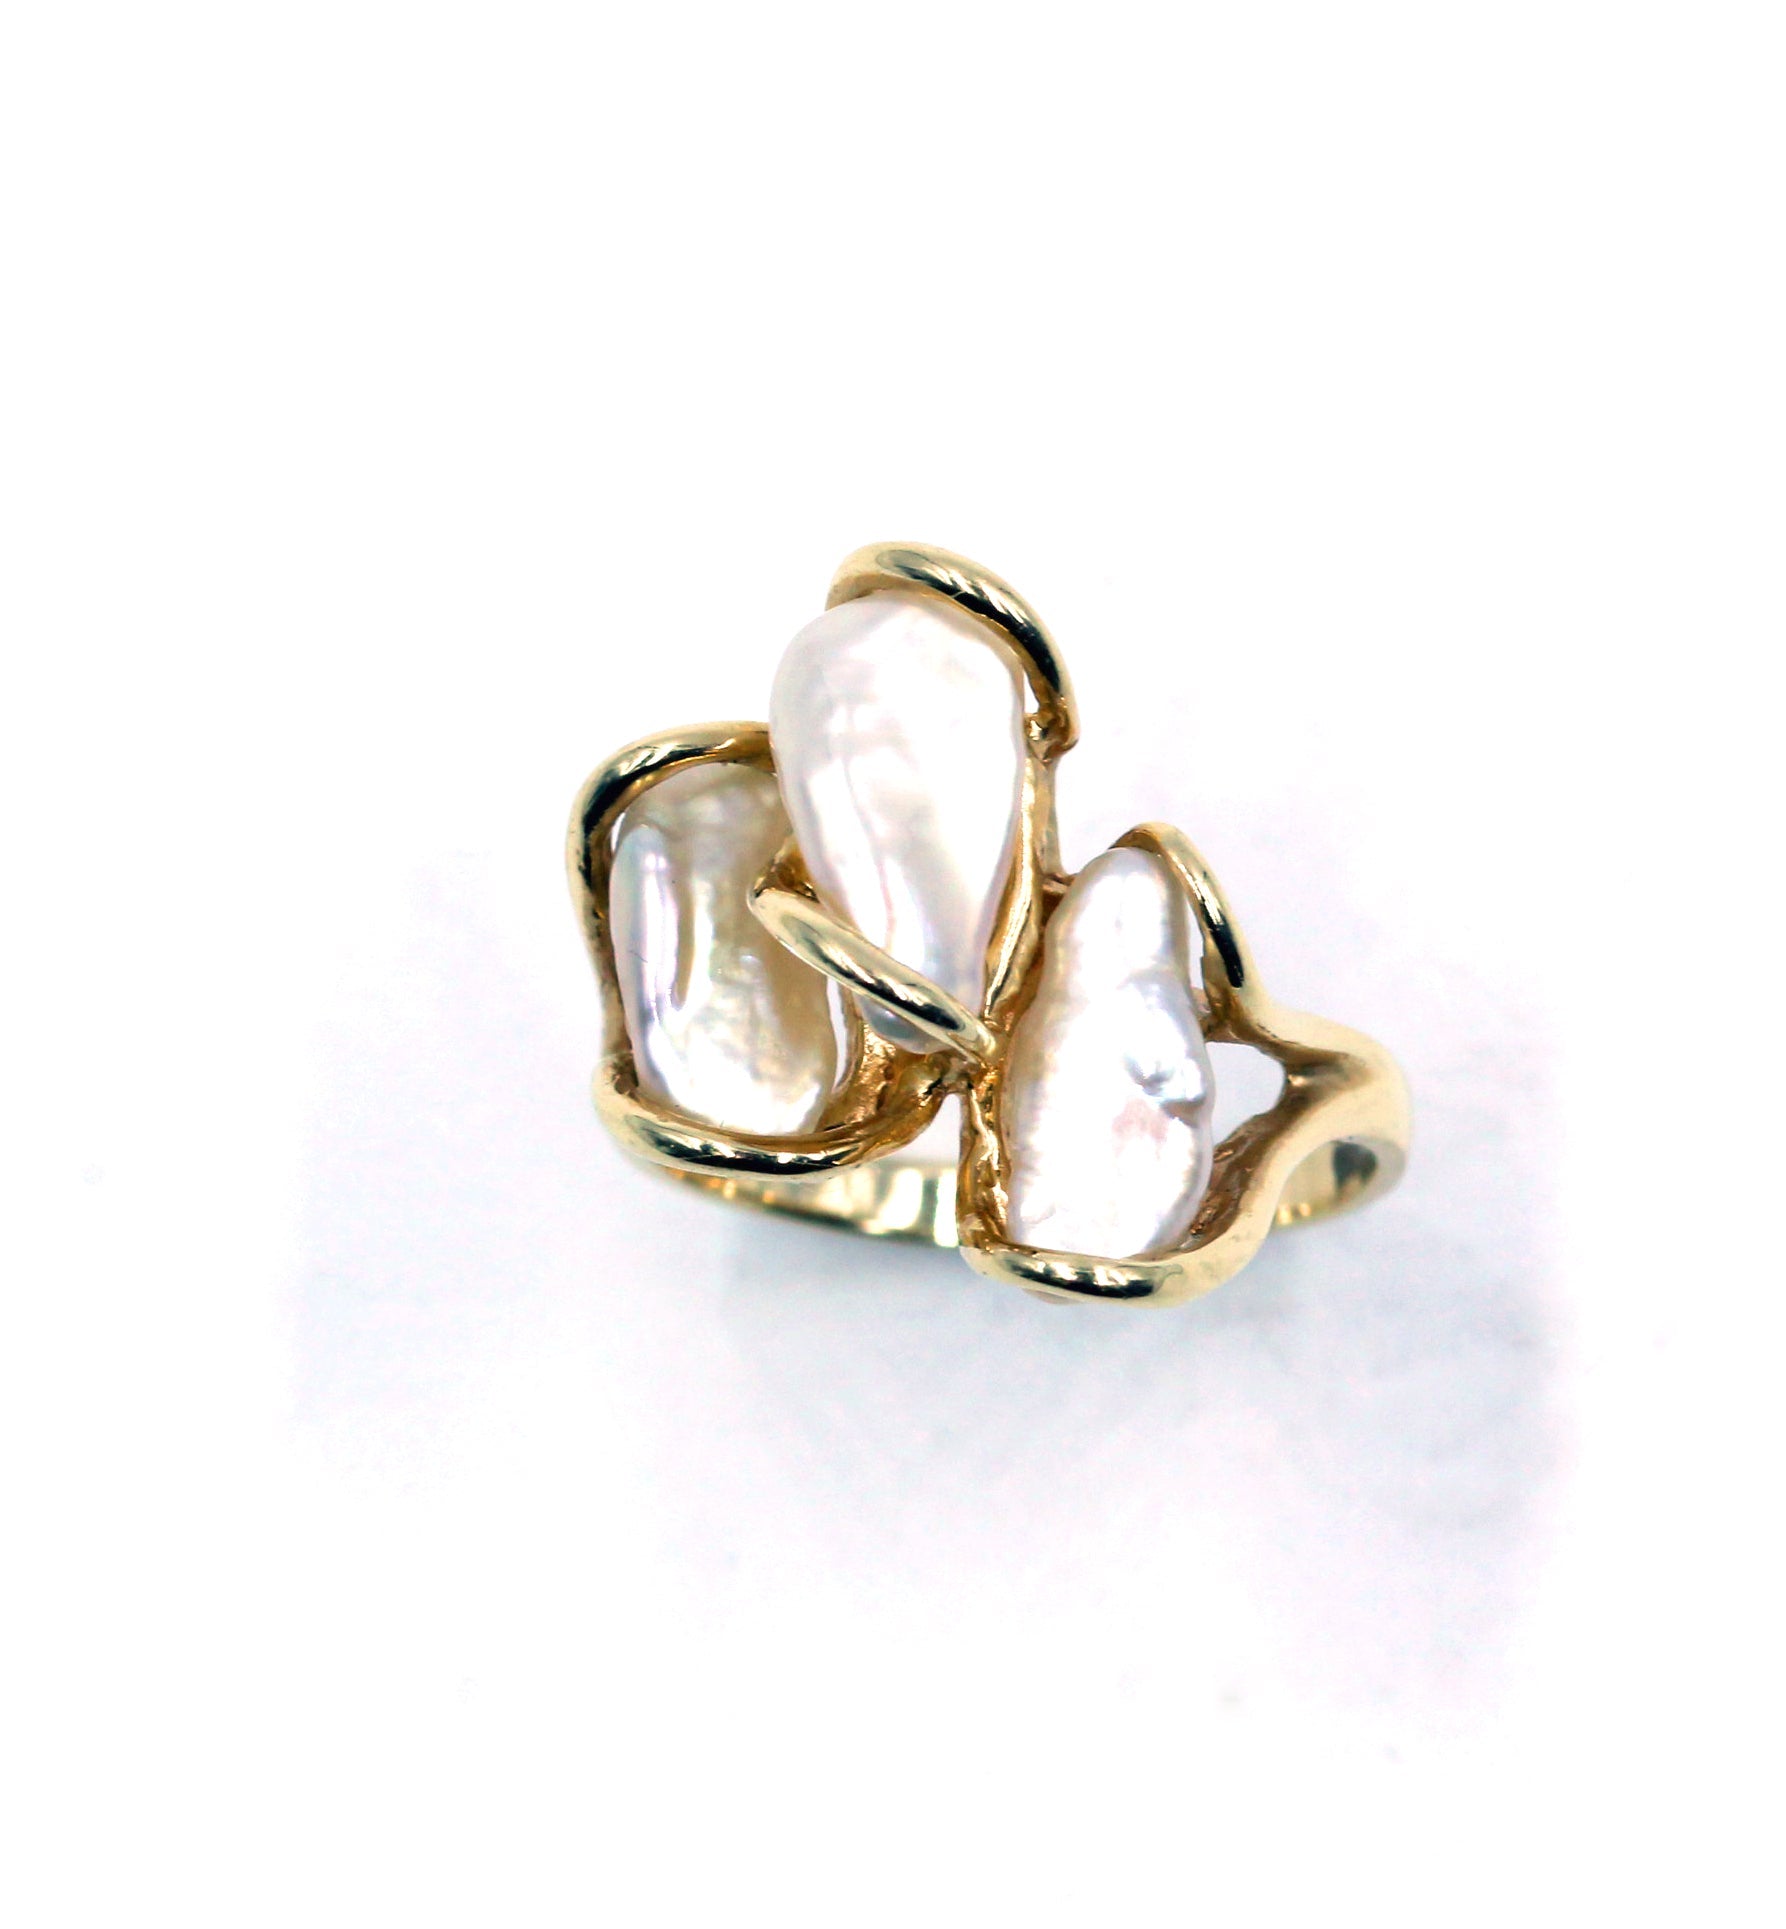 Pre-Owned Cultured Biwa Pearl Ring, SOLD